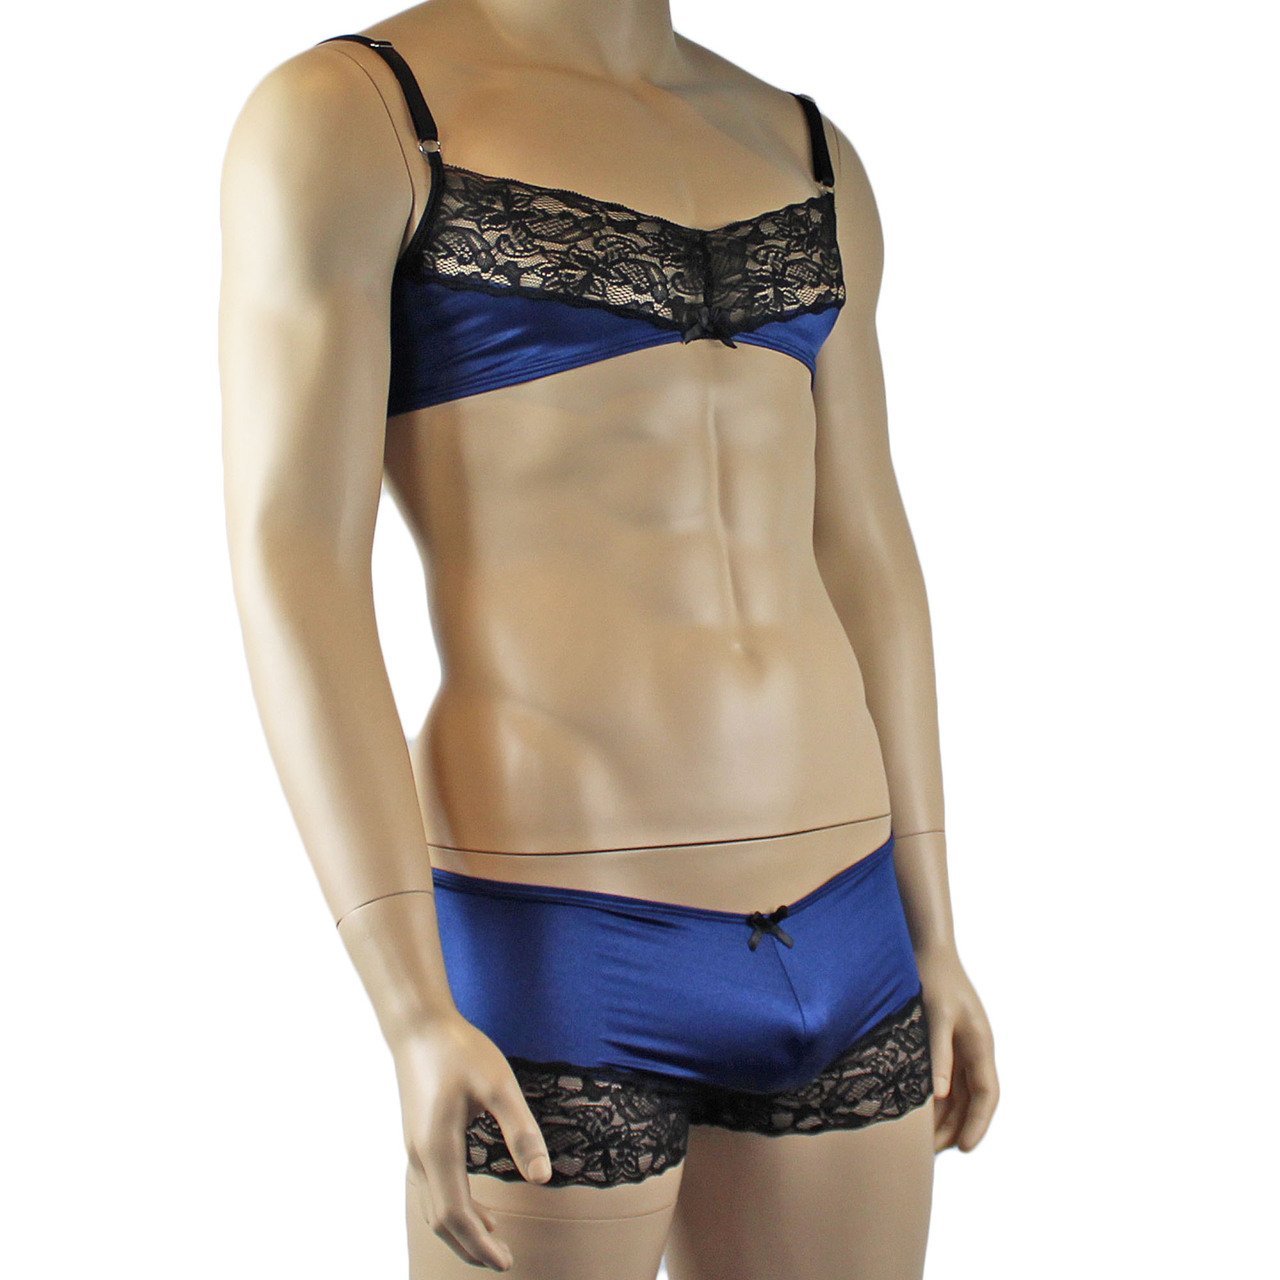 Mens Bra top and Boxer Briefs with Lace Trim (navy & black plus other colours)